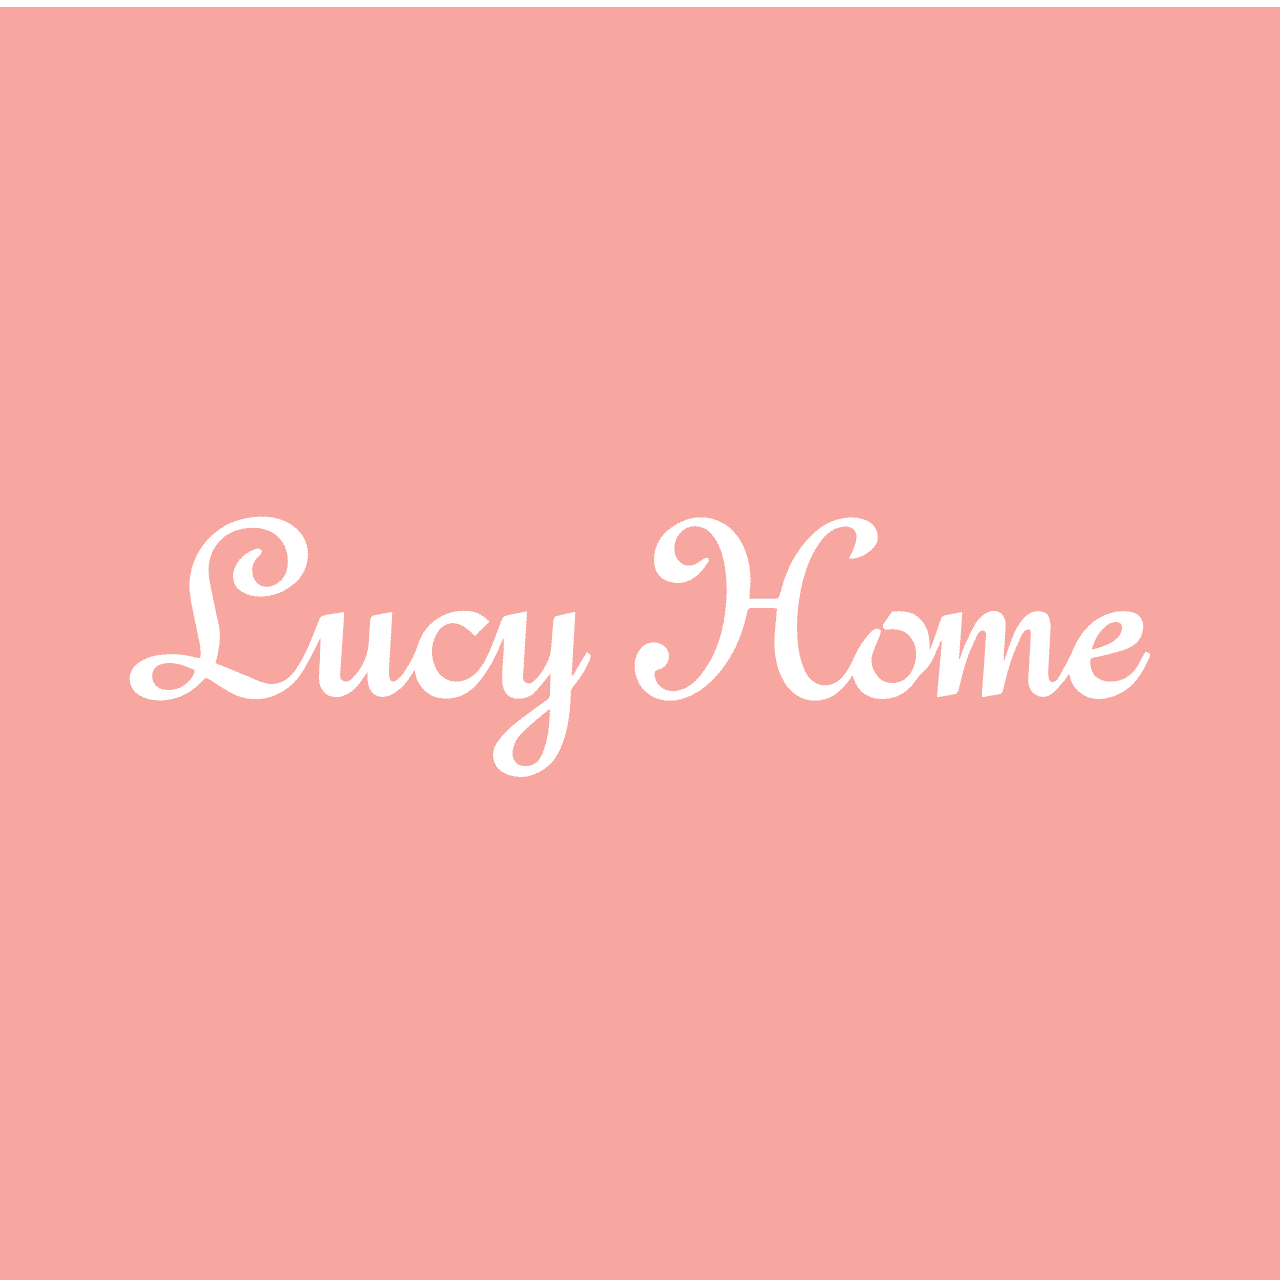 Lucy Home